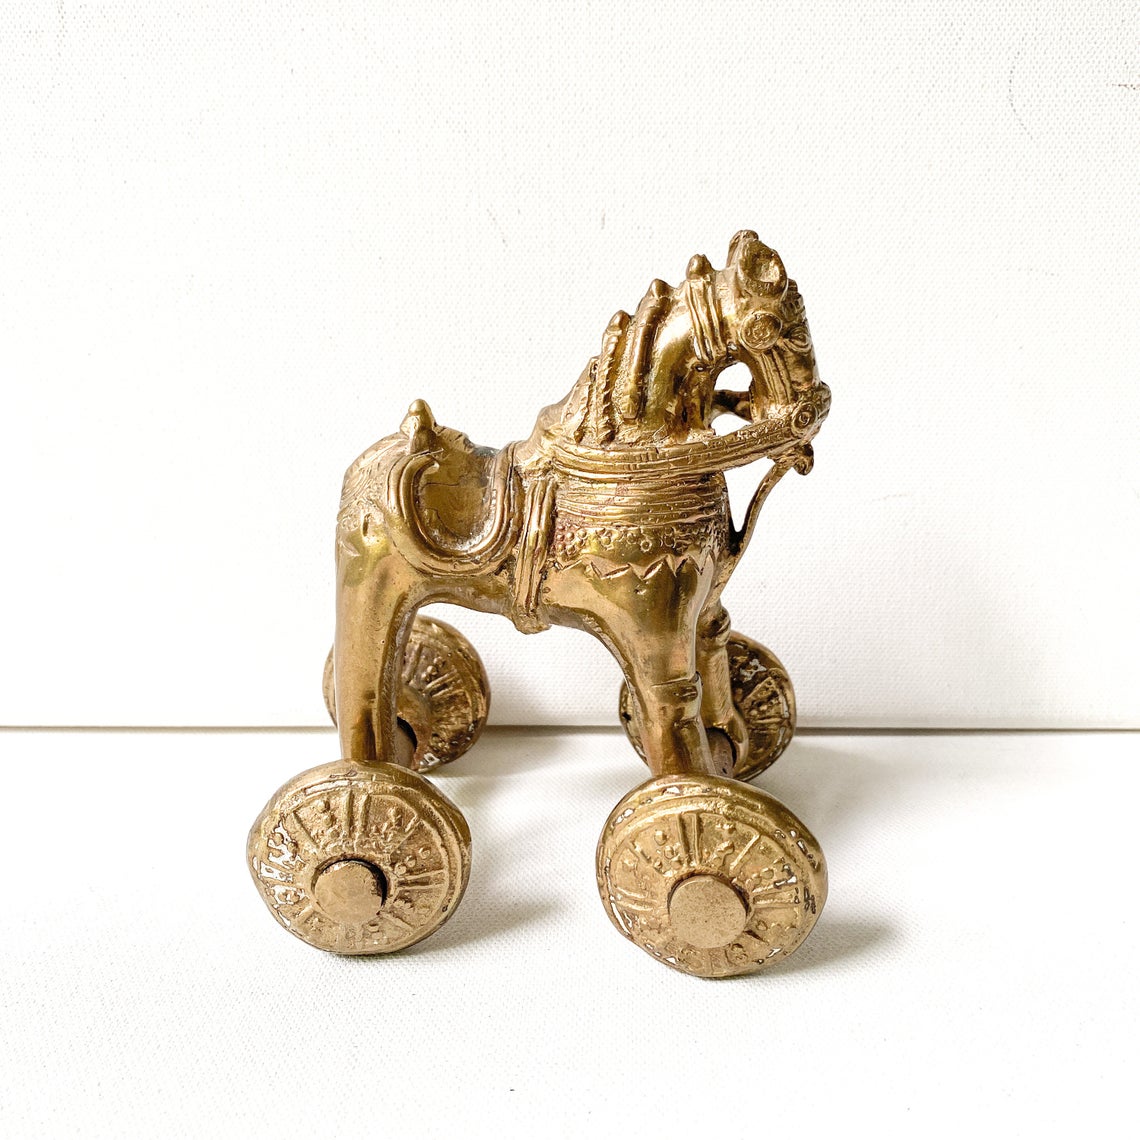 Vintage Brass Horse on Wheels, India Temple Toy, Trojan Horse Style